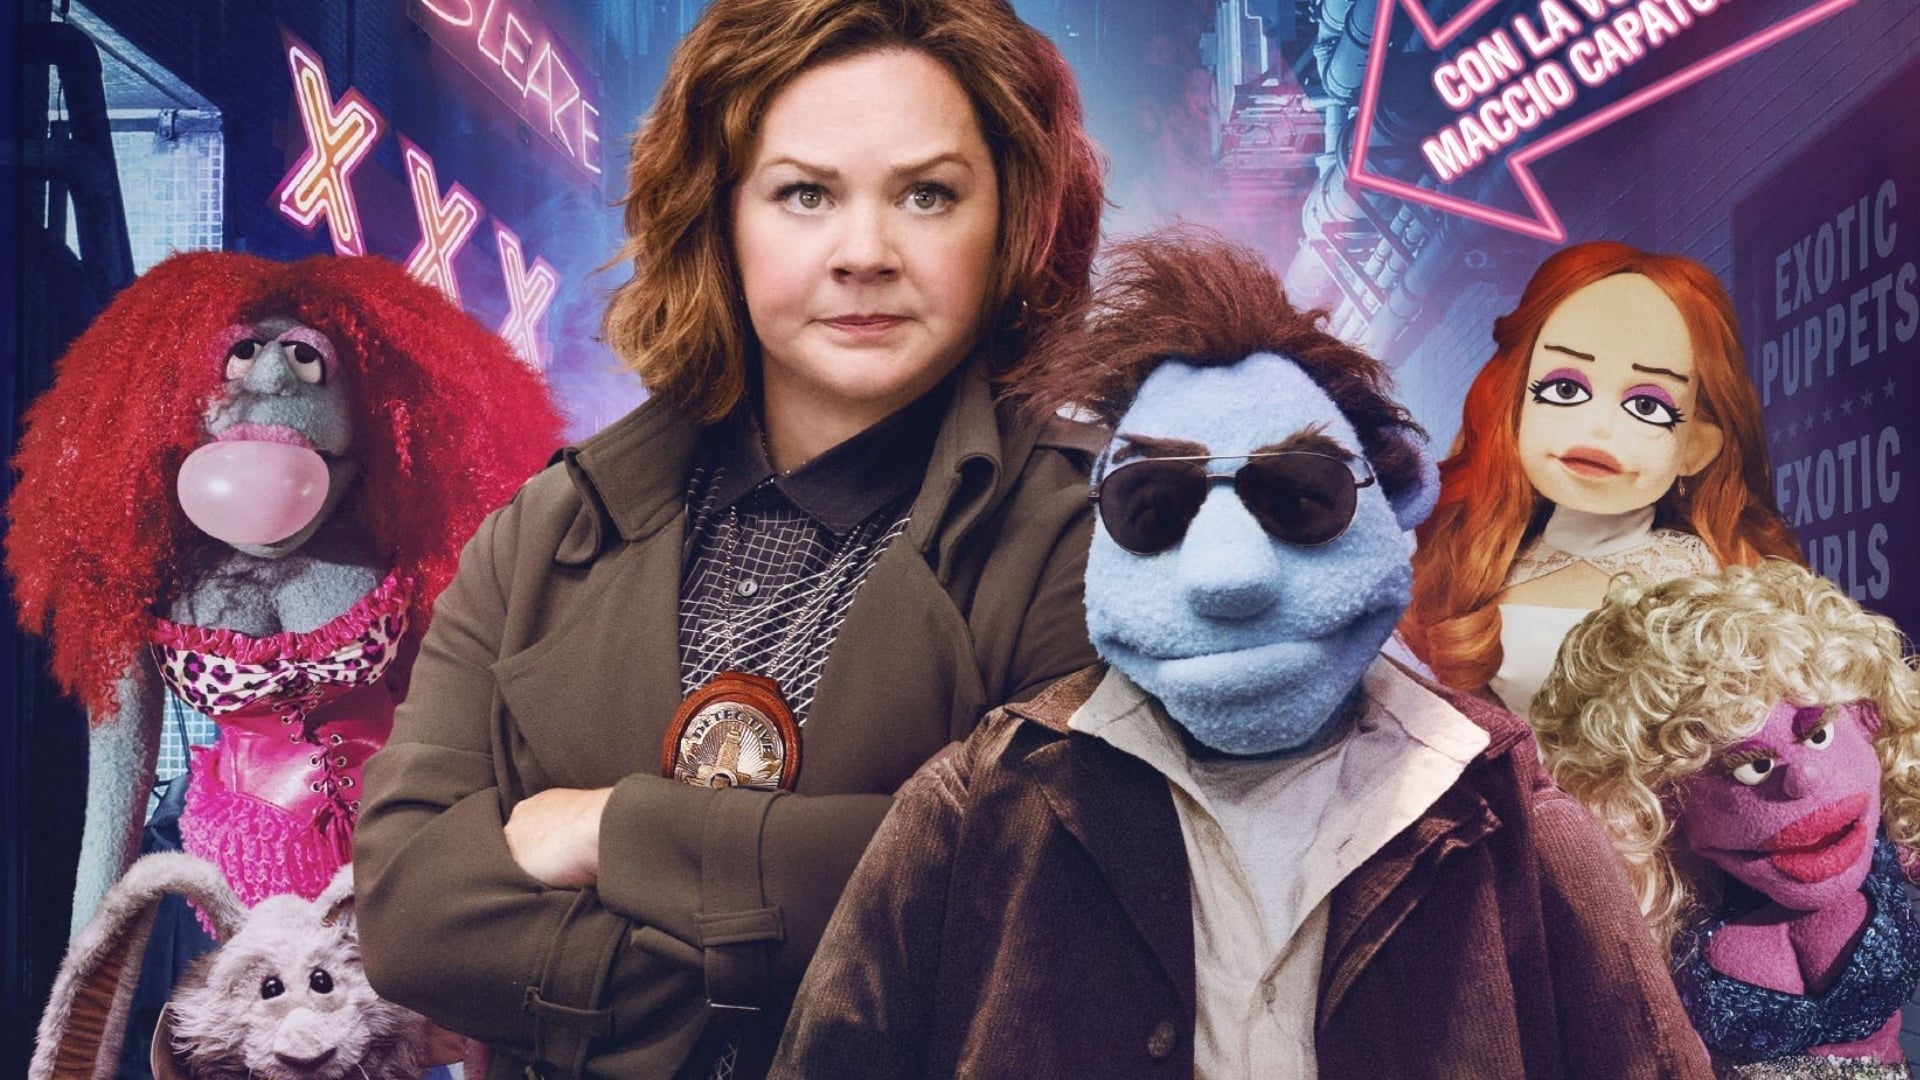 The Happytime Murders Official Restricted Trailer Coming Soon.